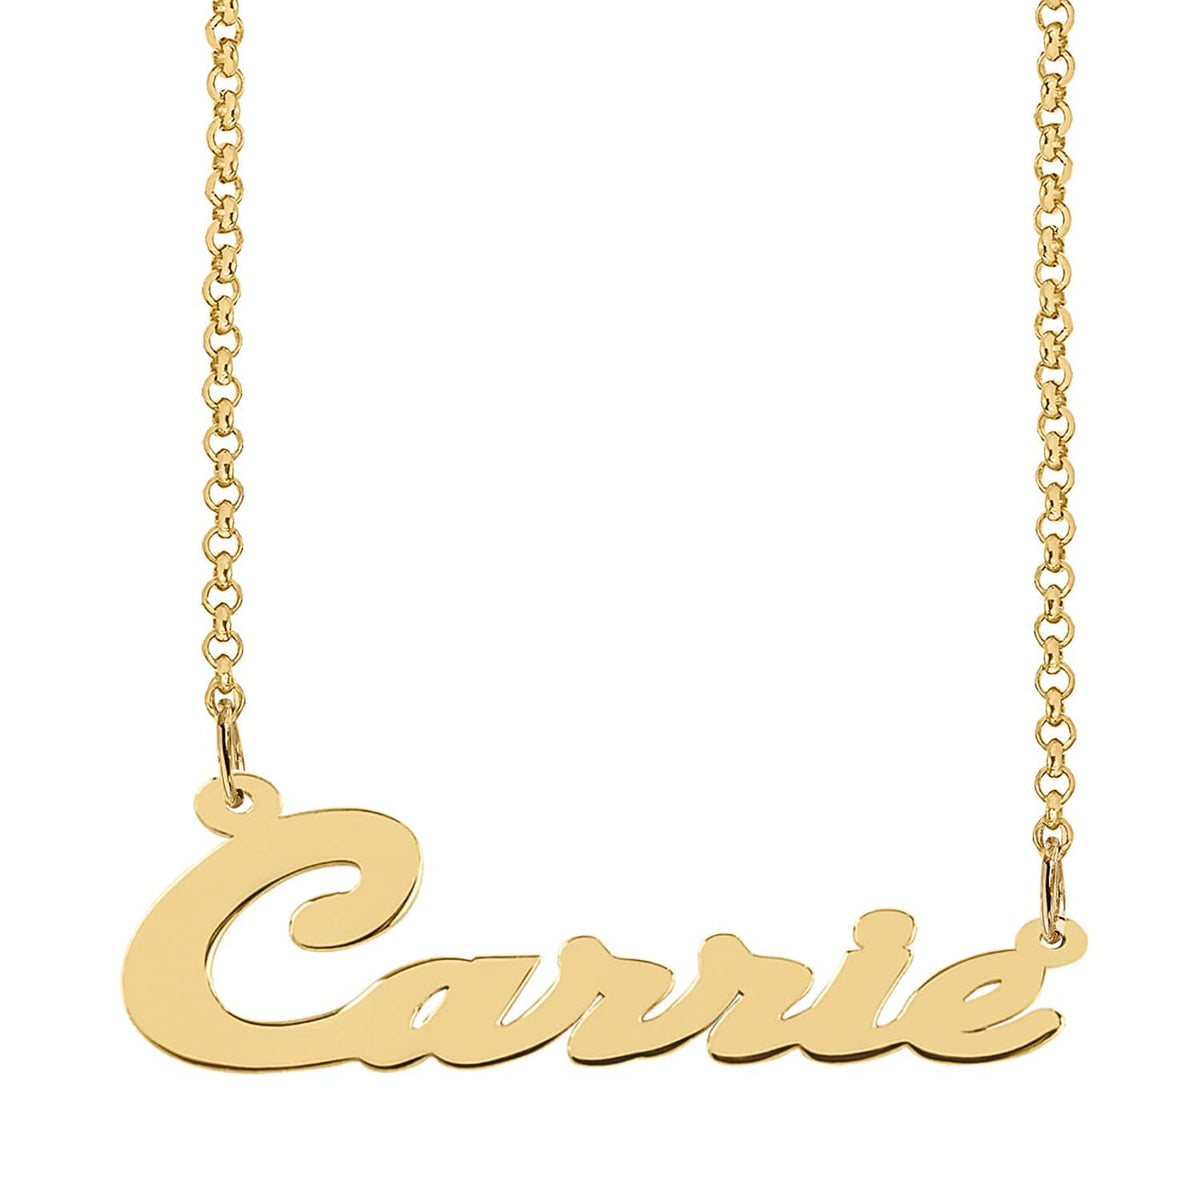 Gold Plated / Rollo Chain Script Name Necklace &quot;Carrie&quot;